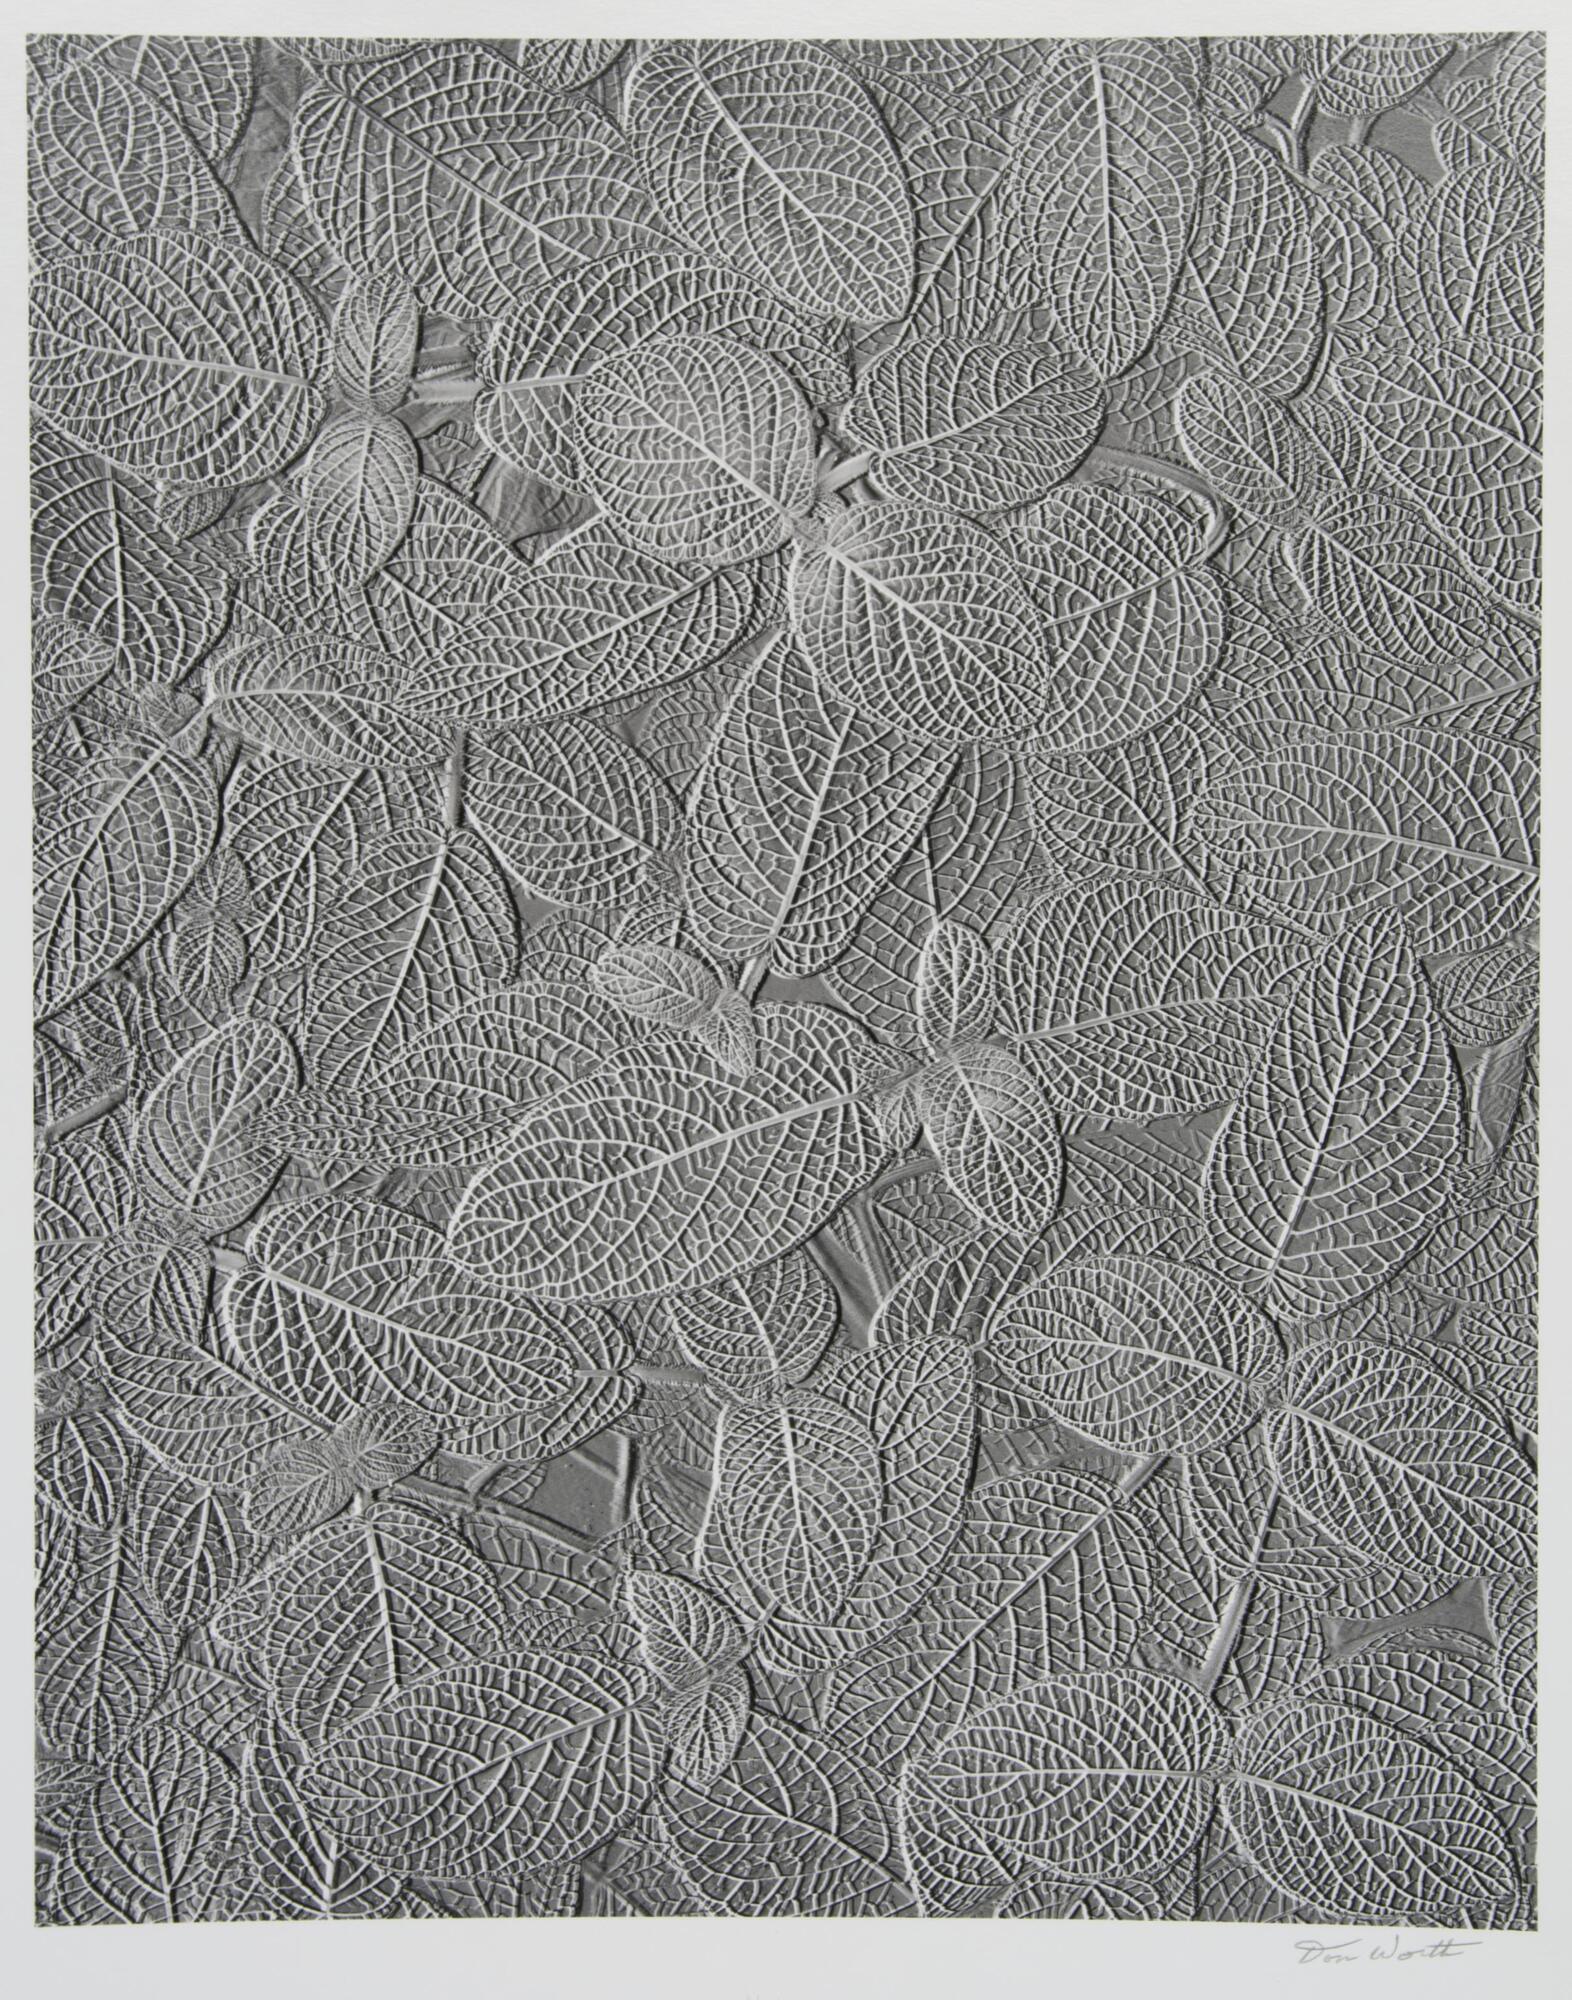 An overlay of oval shaped leaves taking over the entire image. Light grey hues.